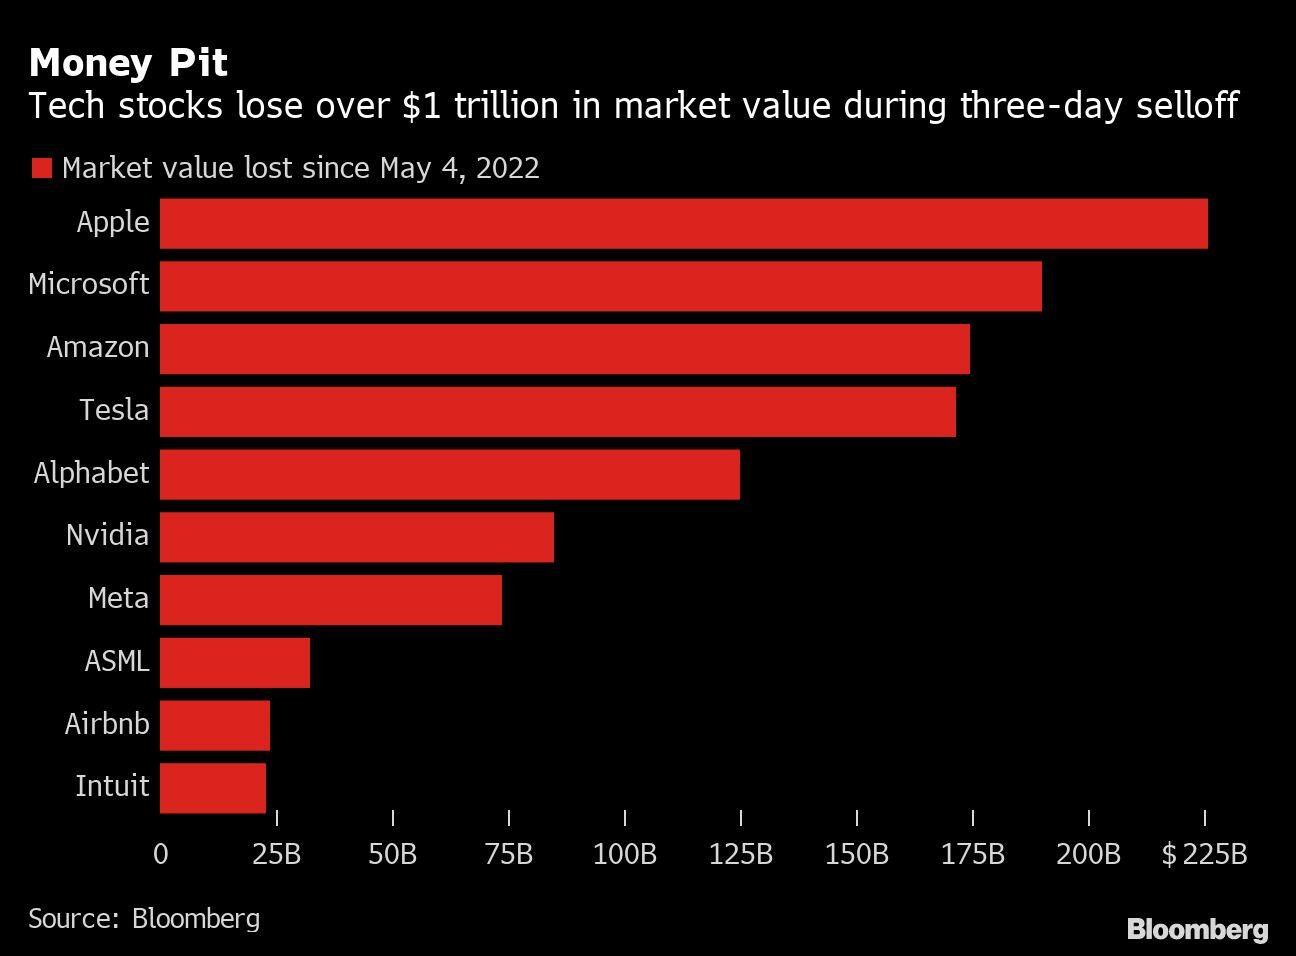 Money Pit | Tech stocks lose over $1 trillion in market value during three-day selloff